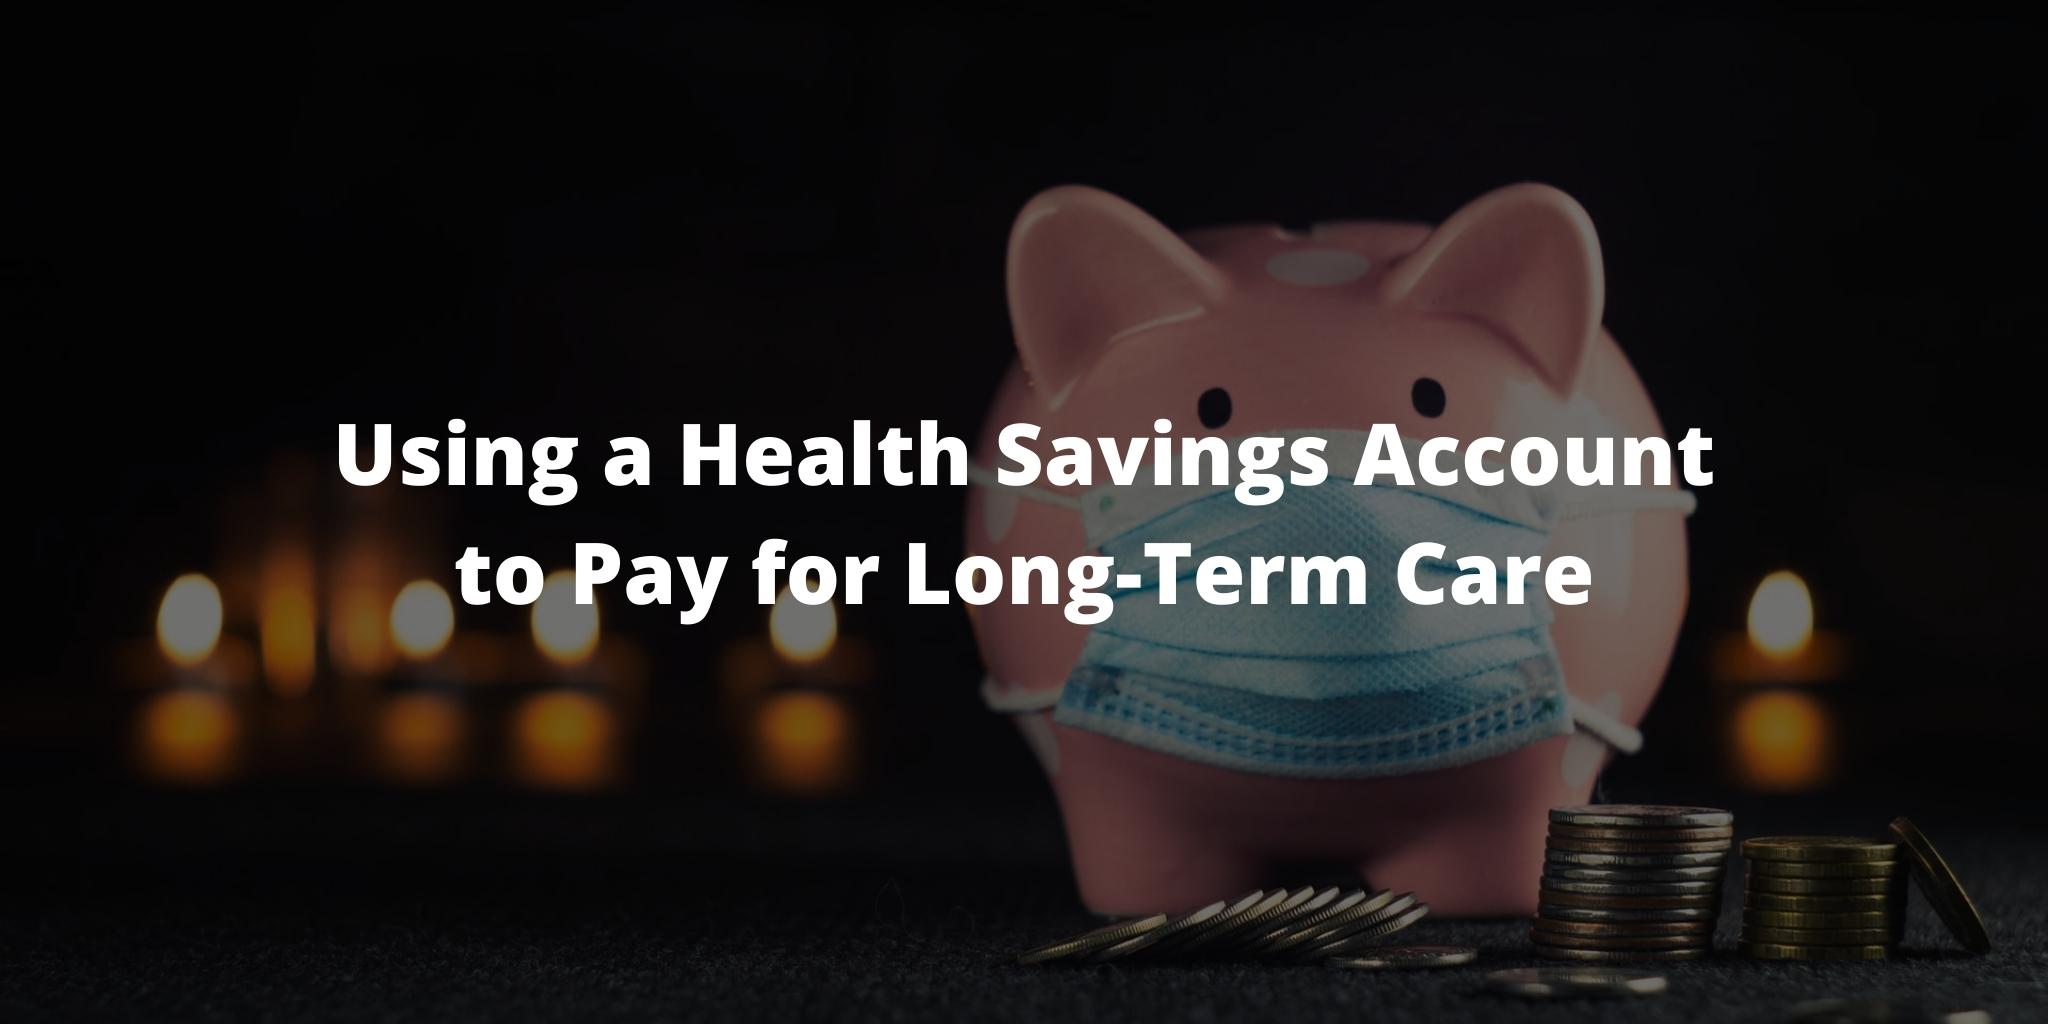 Using a Health Savings Account to Pay for Long-Term Care